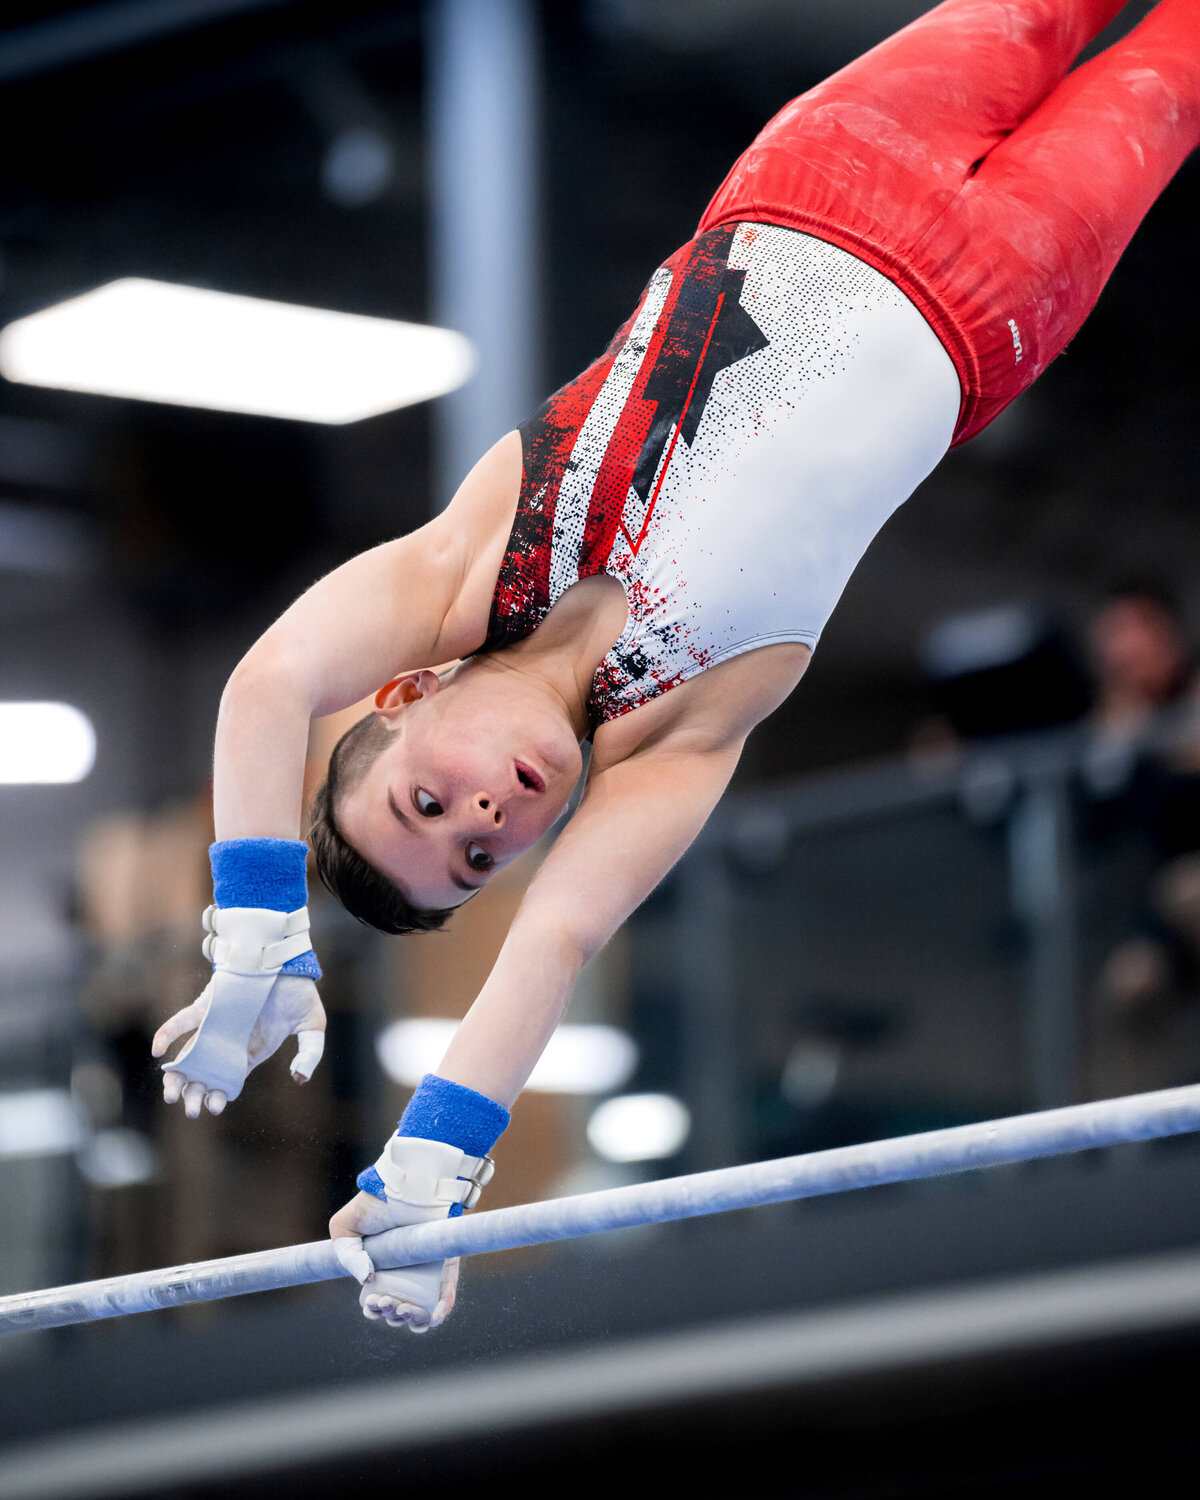 Photo by Luke O'Geil taken at the 2023 inaugural Grizzly Classic men's artistic gymnastics competitionA1_01019